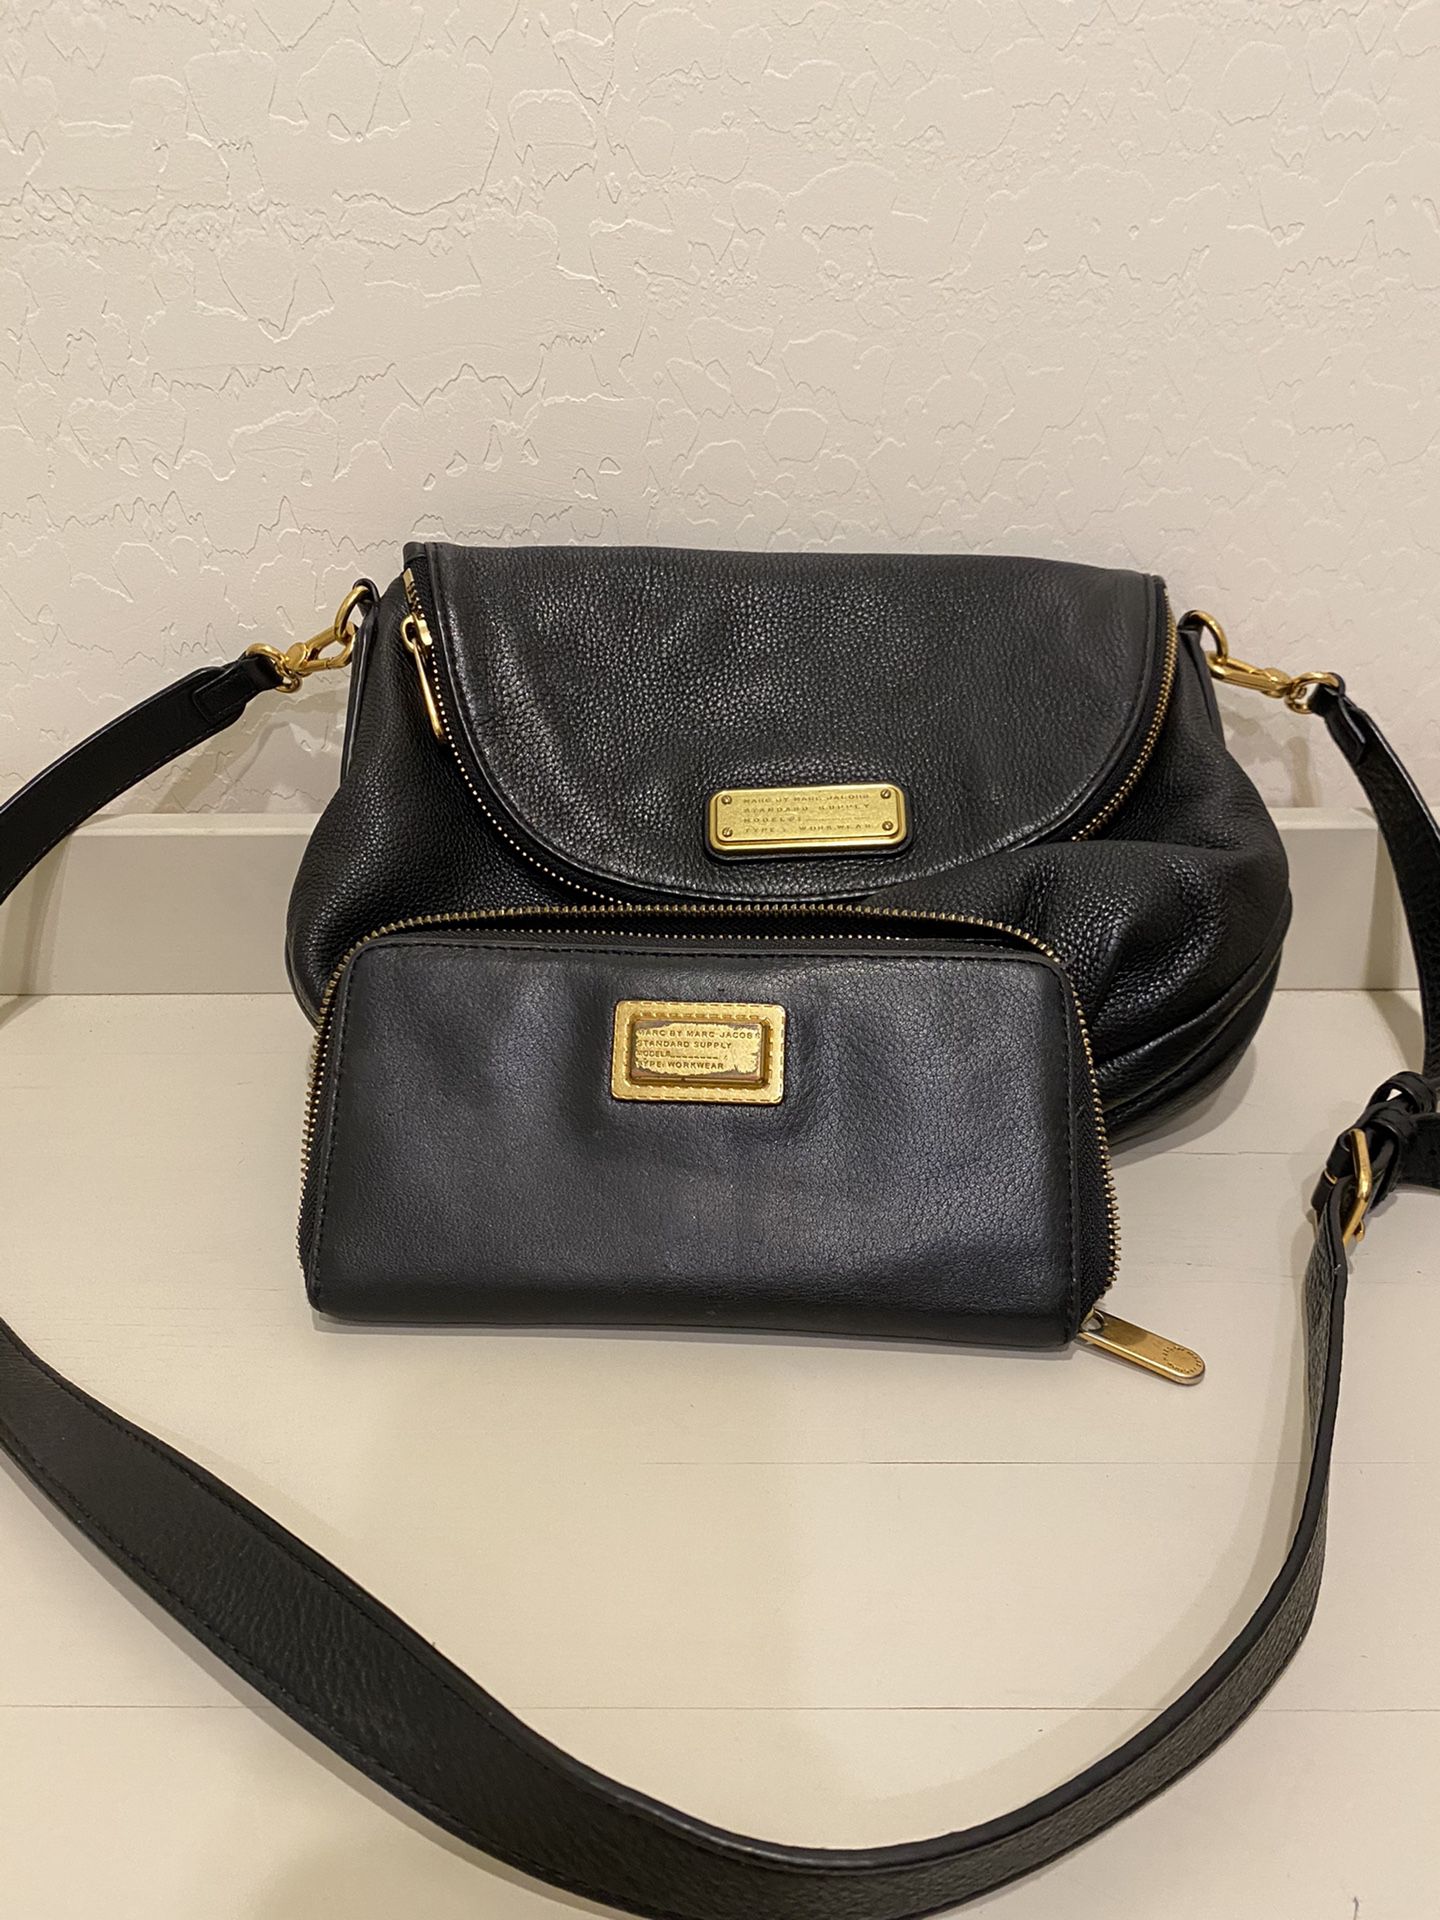 Marc Jacobs crossbody bag and wallet